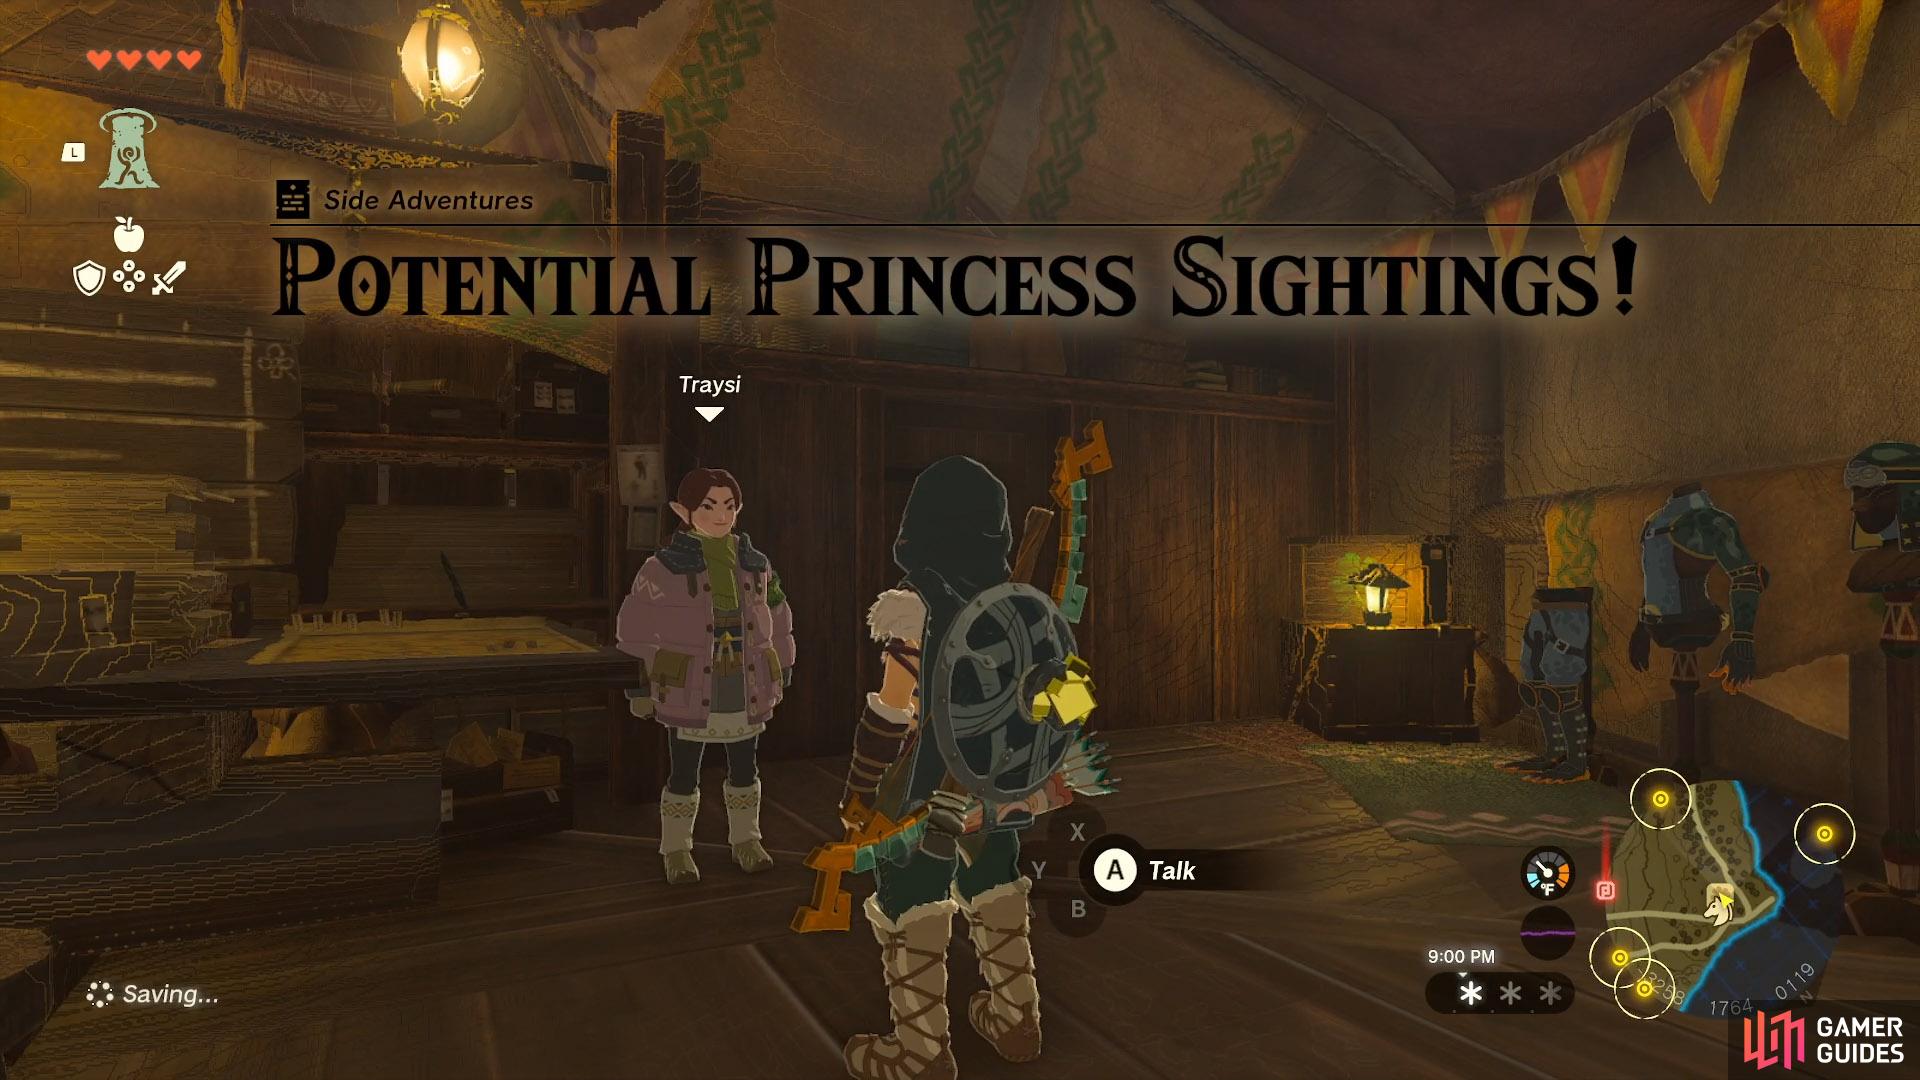 Acquiring the Potential Princess Sightings side adventure